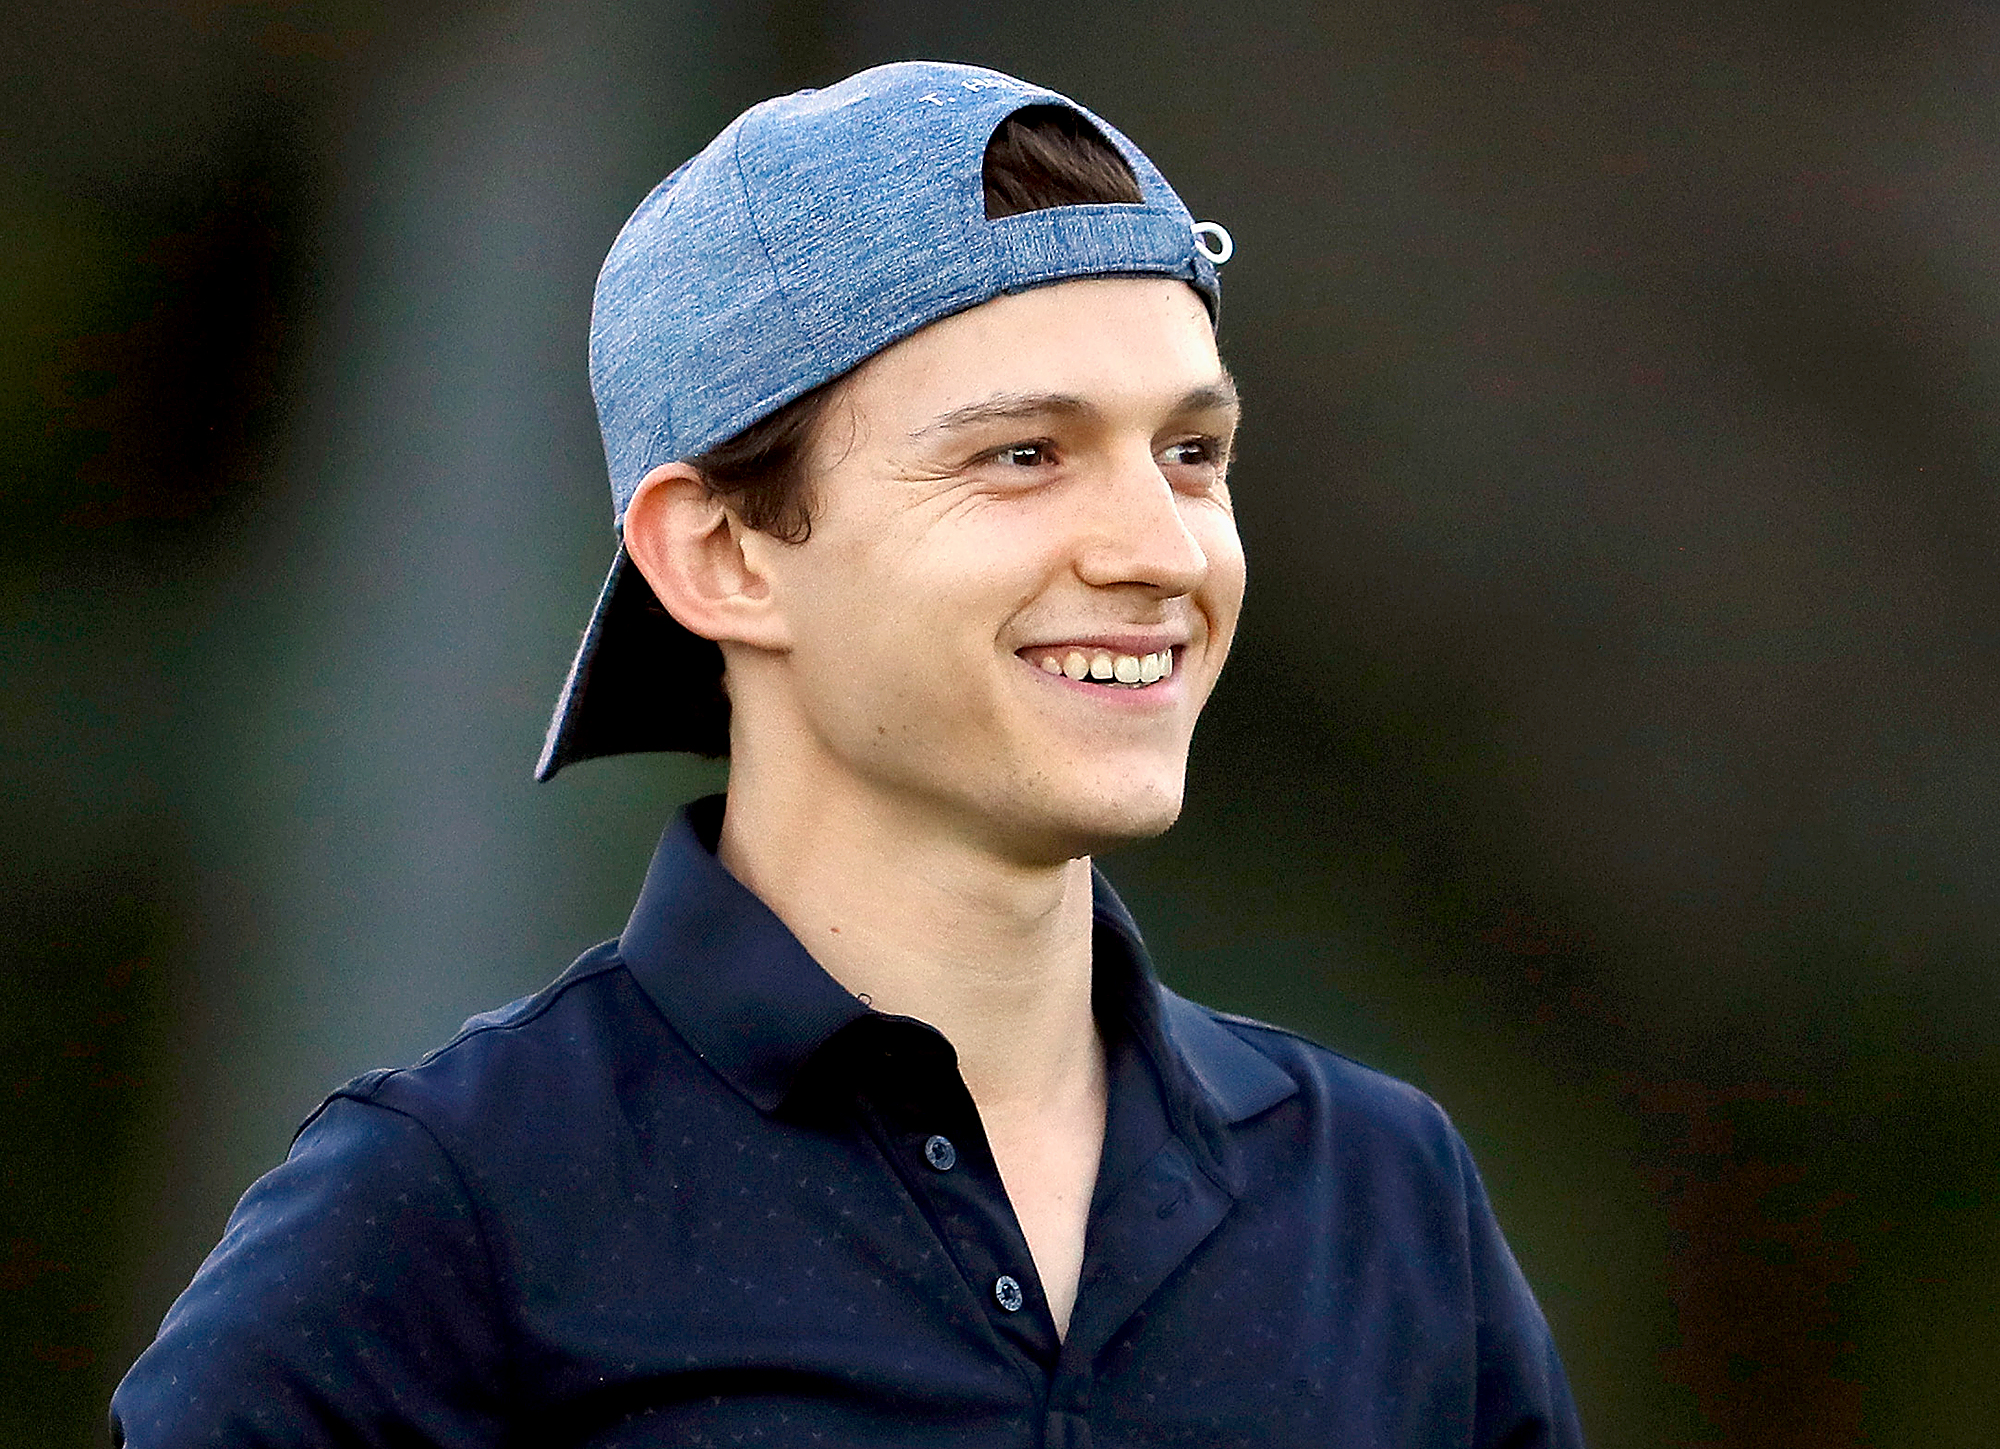 Tom Holland Turns 23: Watch 'Spider-Man' Star Spoil His Own Movies